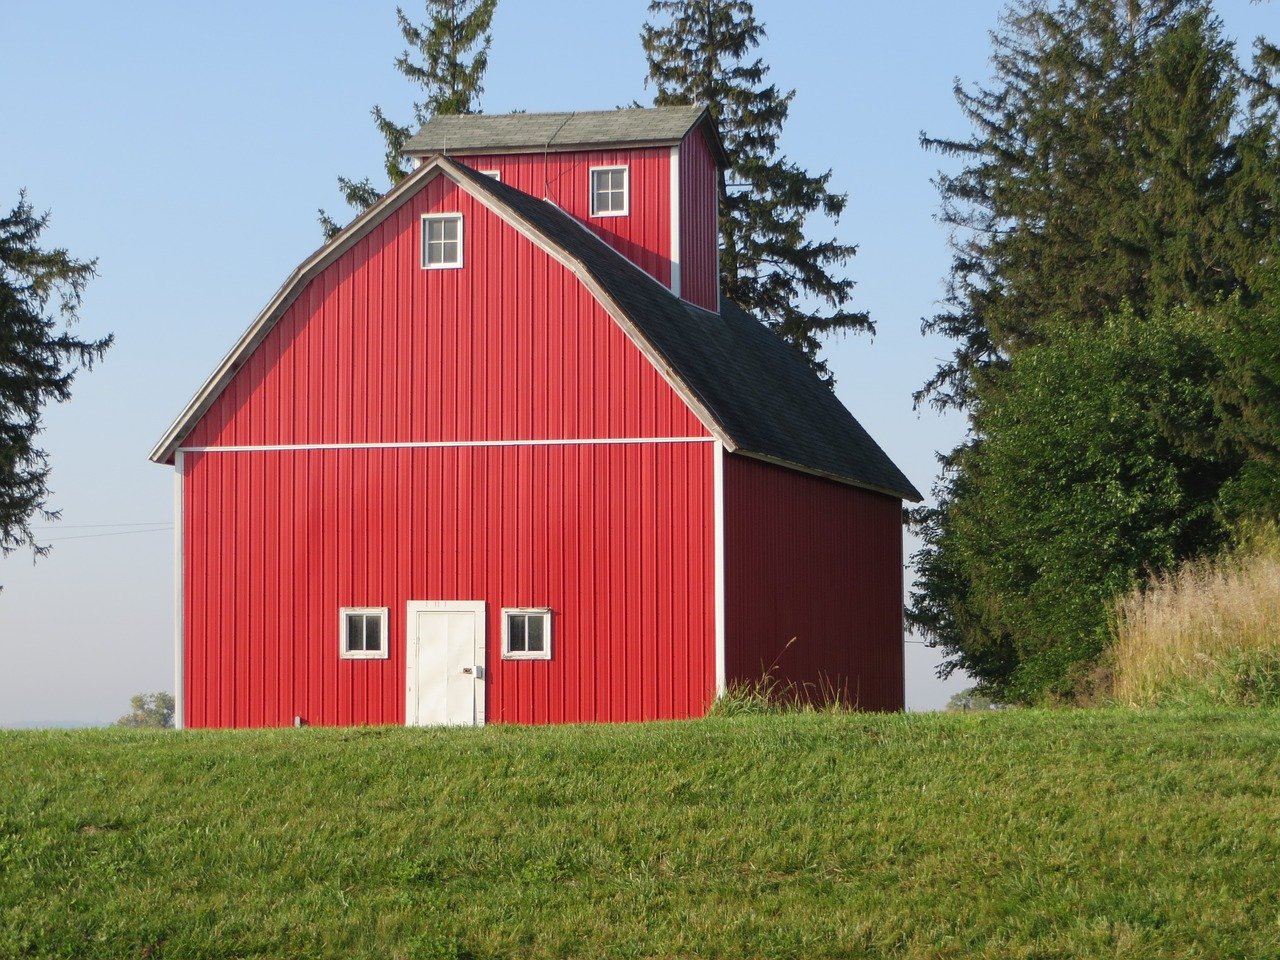 25 Things I’ve Discovered from Living in a Barn: Reflections on Country Lif...